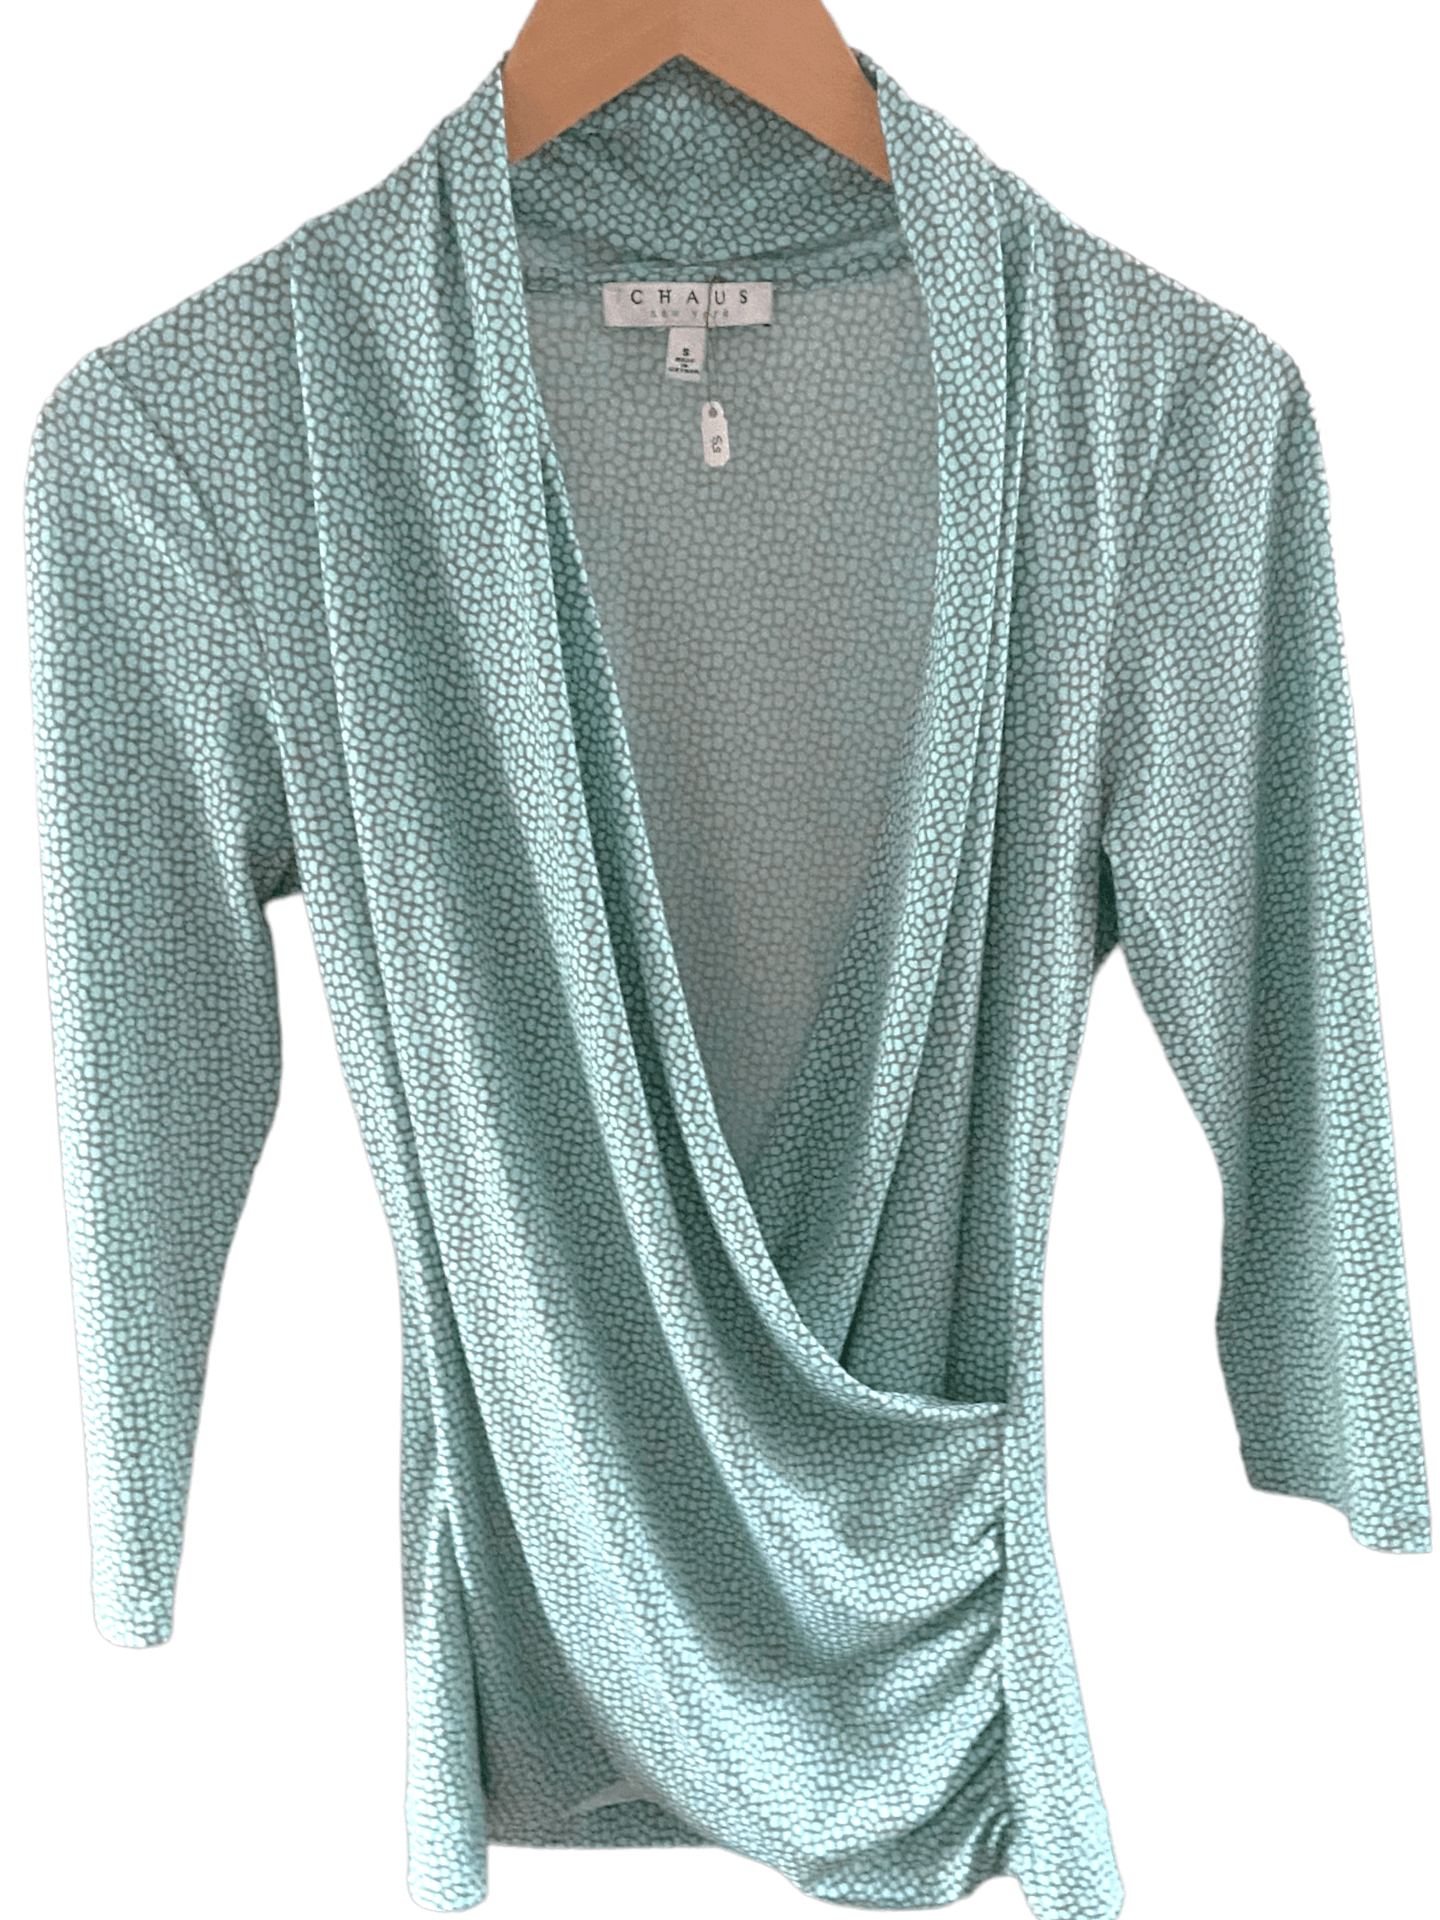 Soft Summer CHAUS print faux wrap blouse gray and mint green